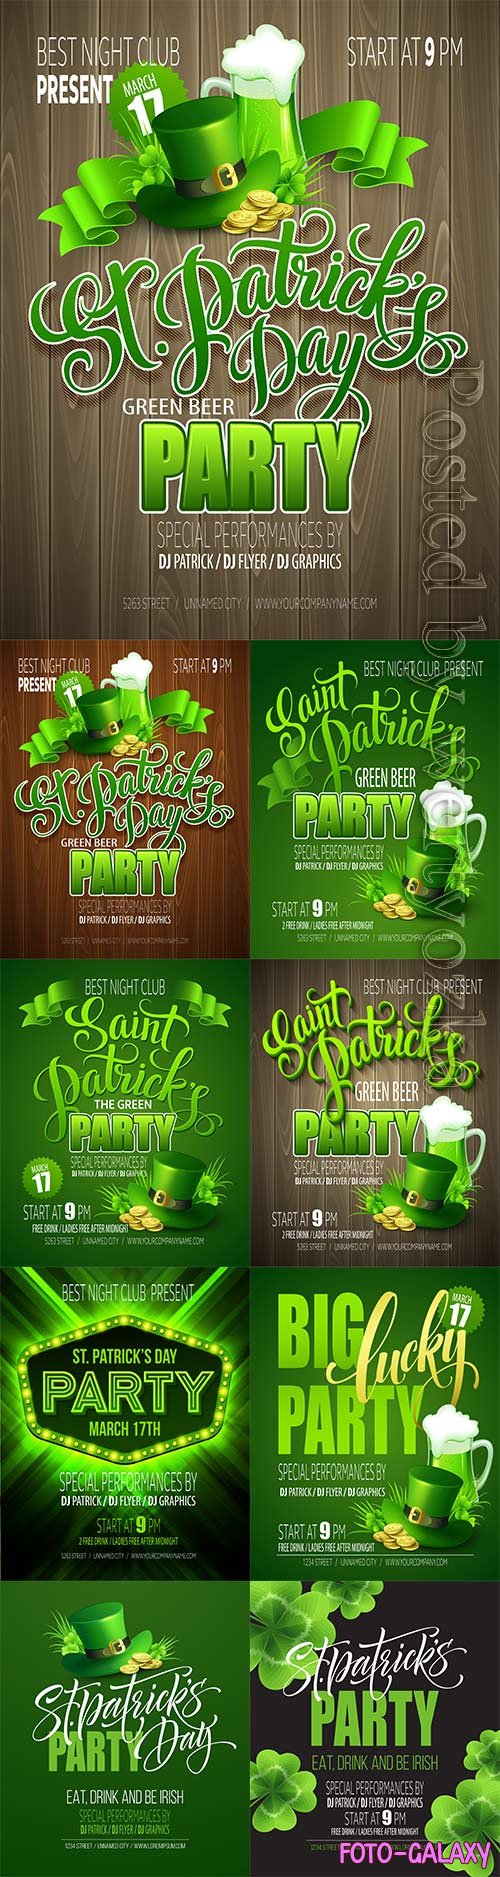 Patricks day party holiday poster vector design